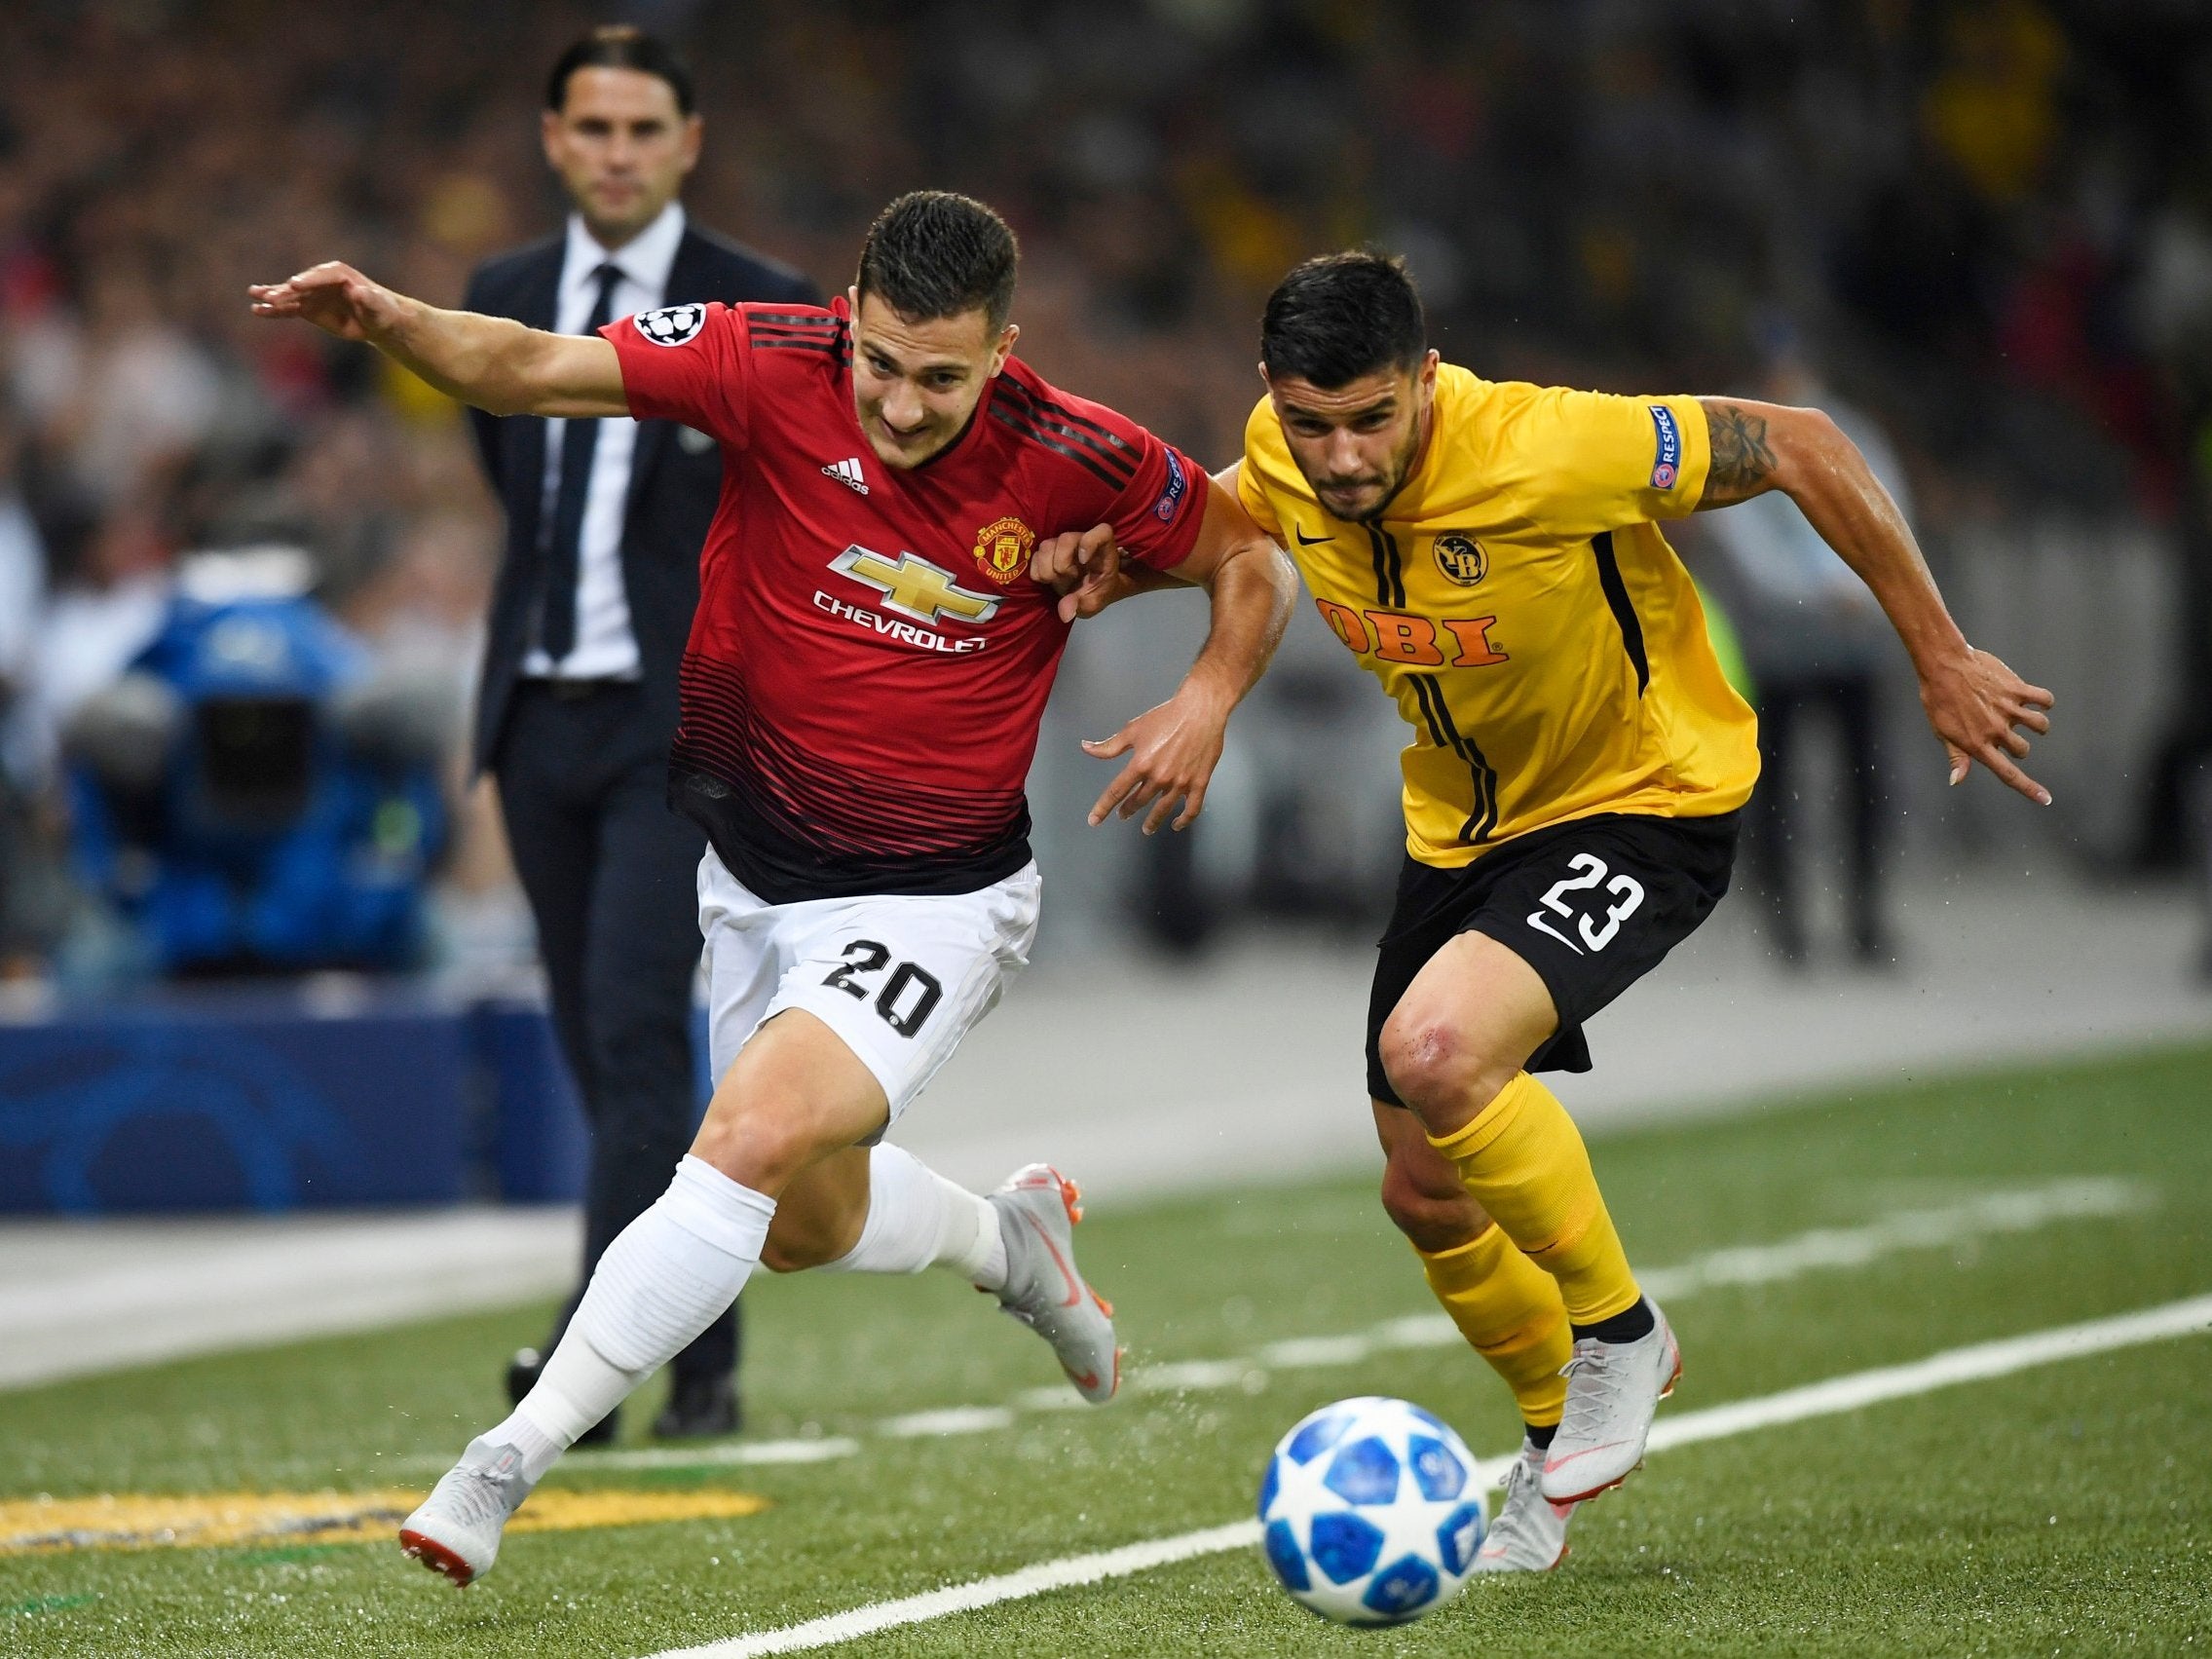 Diogo Dalot&apos;s attacking instincts on debut offer glimpse of more dynamic Manchester United to rival City strengths